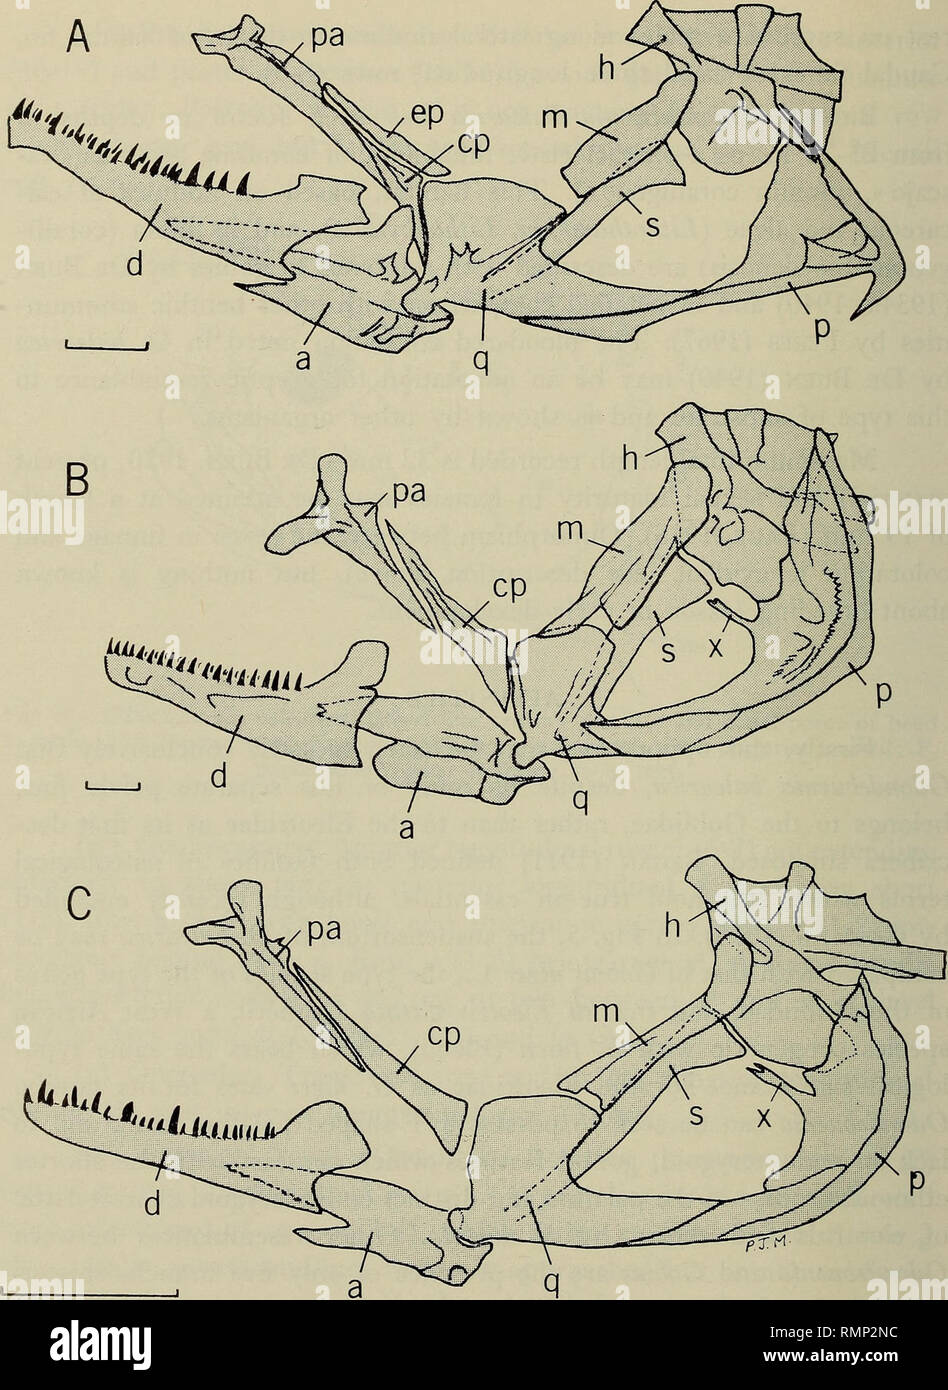 . Annali del Museo civico di storia naturale Giacomo Doria. Natural history. 354 PJ. MILLER - E. TORTONESE. Fig. 5 - Lateral view of suspensorium in (A) Eleotris vittata Duméril (Agorkpo Creek, near Sogamkofe, Ghana); (B) Gobius niger L. (Roskilde Fjord, Denmark), and (C) Odondebuenia balearica (Kastel Sucurac, Split, Yugoslavia, mzuf 1672). a, articular; cp, ectopterygoid; d, dentary; ep, endopterygoid ; h, hyomandibular ; m, metapterygoid ; p, preoperculum; pa, palatine; q, quadrate; s, symplectic ; x, symplectic process of preoperculum; note that angular is not delimited from articular in d Stock Photo